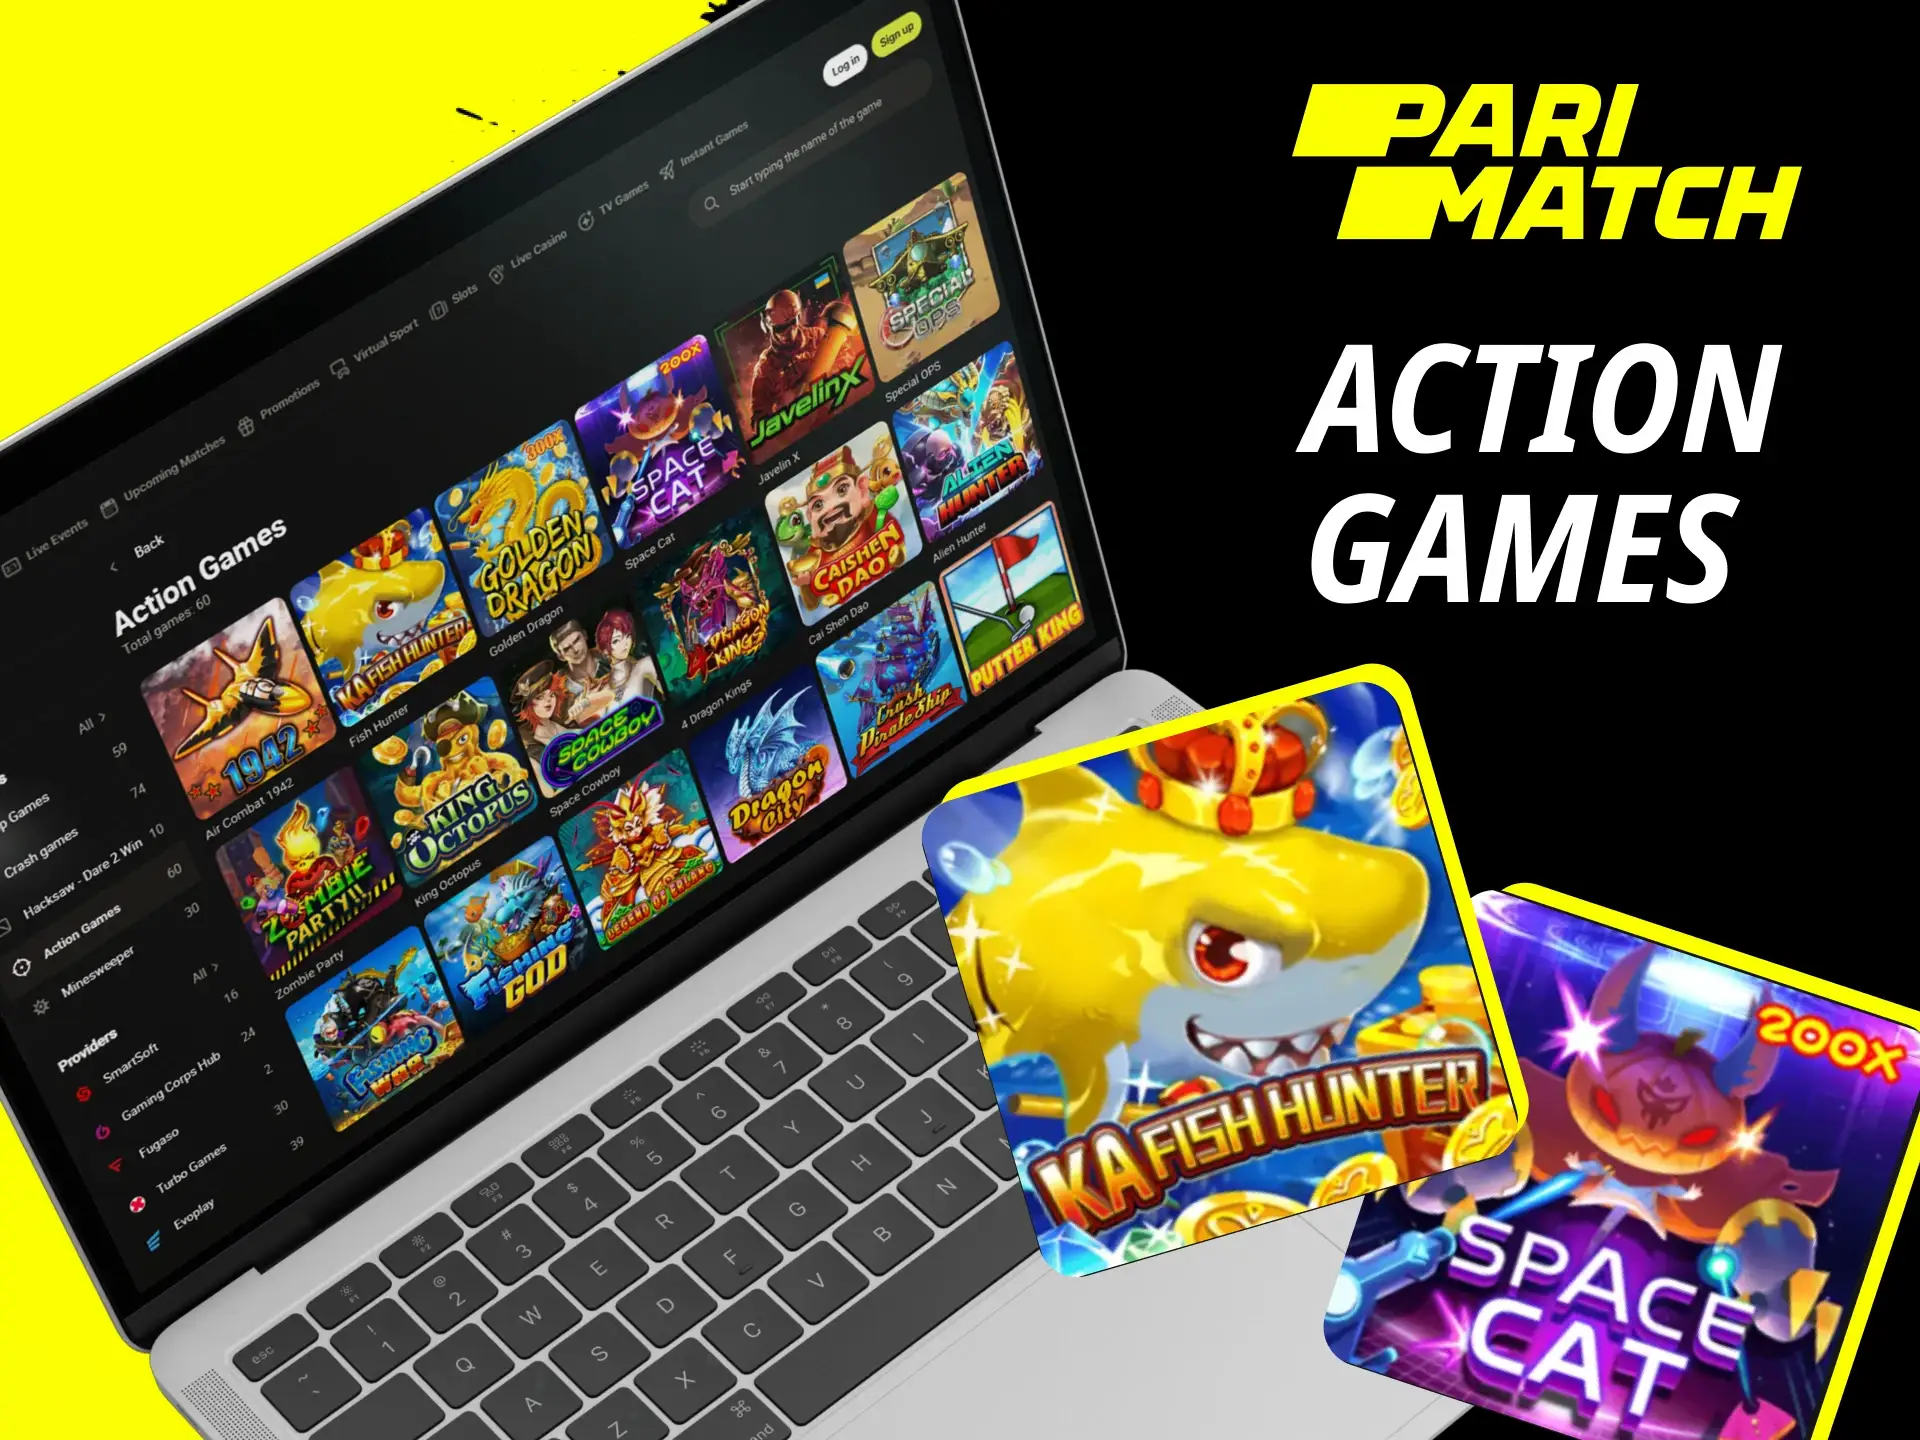 What Action Games are there on the Parimatch online casino website.